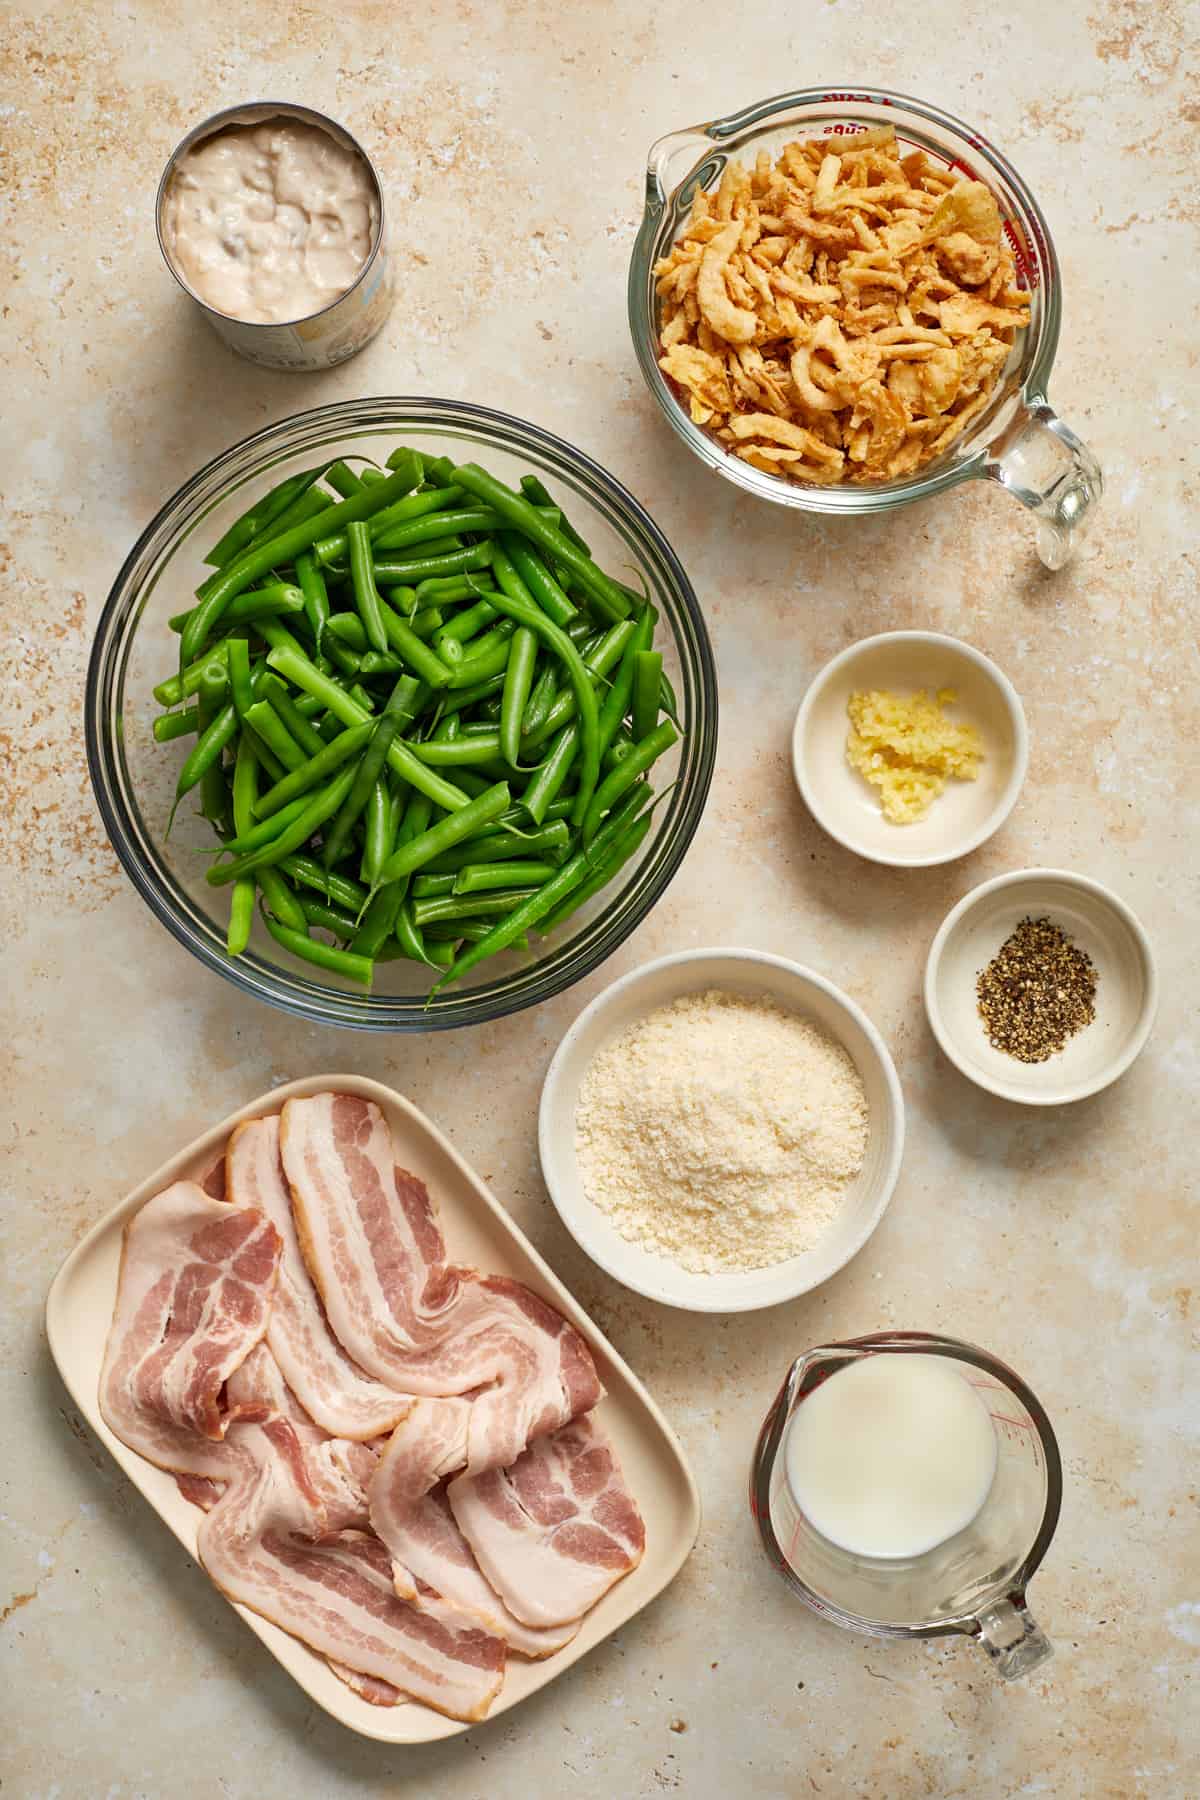 Fried onions, soup, green beans, bacon and other ingredients for recipe arranged on surface.